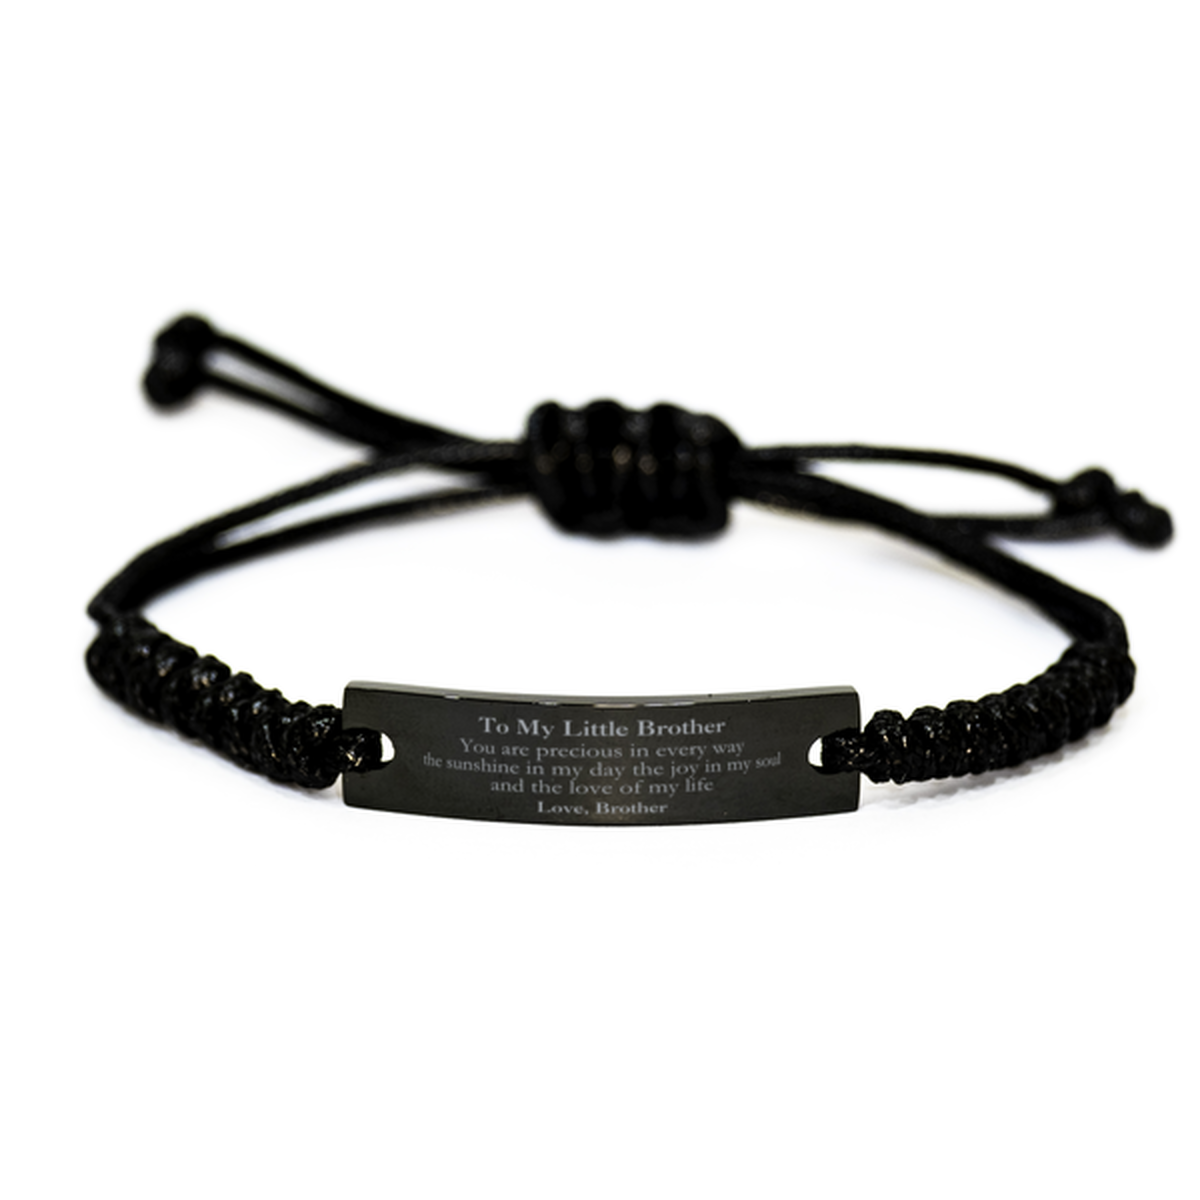 Graduation Gifts for Little Brother Black Rope Bracelet Present from Brother, Christmas Little Brother Birthday Gifts Little Brother You are precious in every way the sunshine in my day. Love, Brother